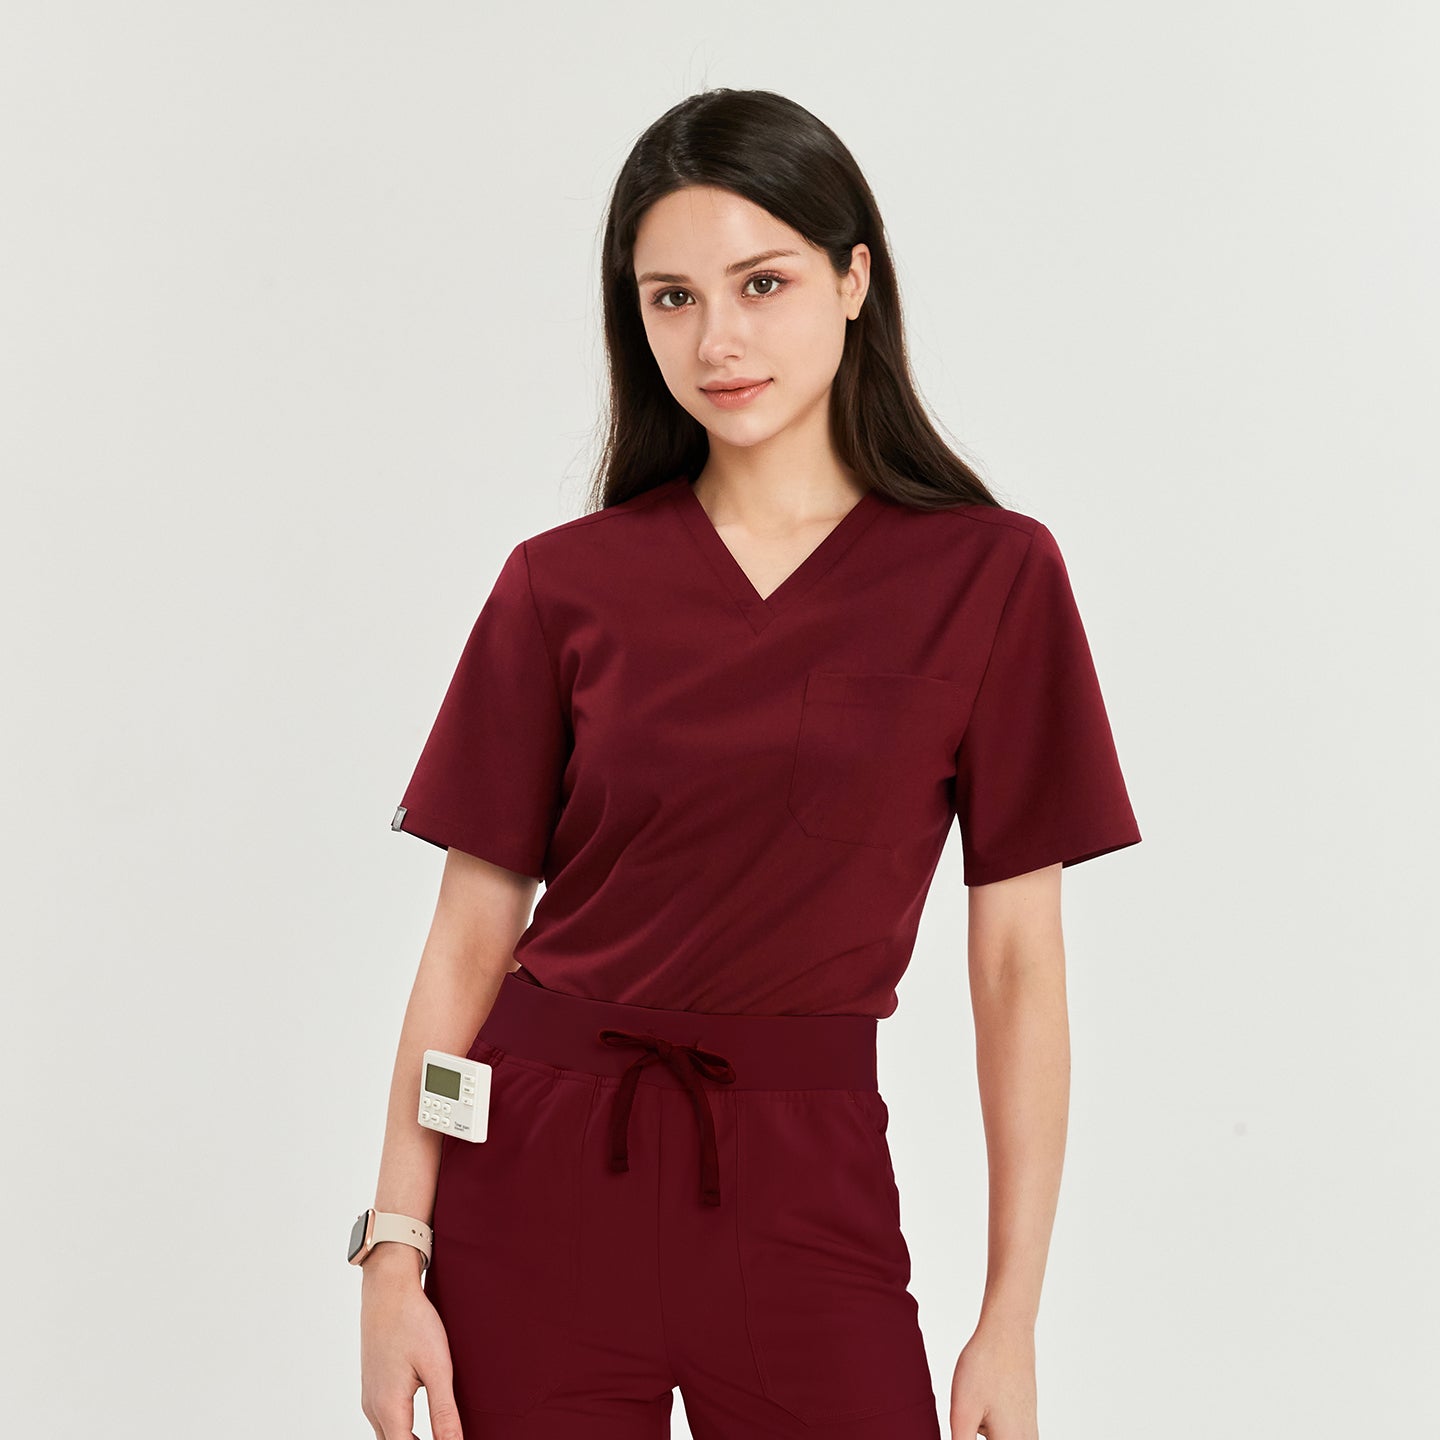 Woman in V-neck scrub top and pants with a medical device clipped to the waist, looking directly at the camera,Burgundy